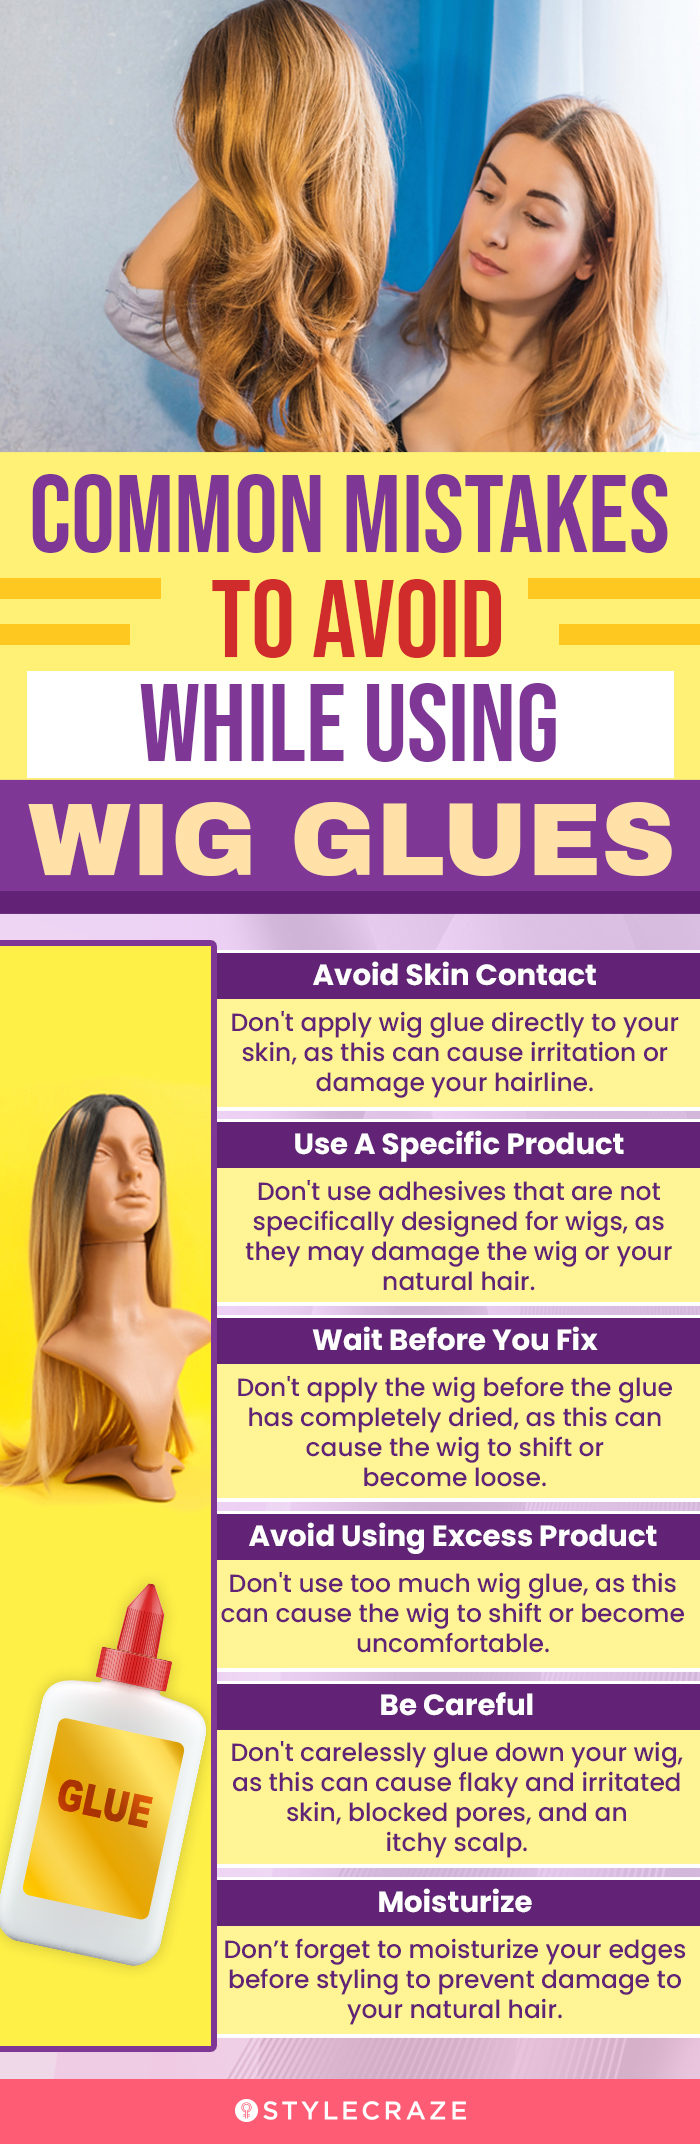 Common Mistakes To Avoid While Using Wig Glues (infographic)